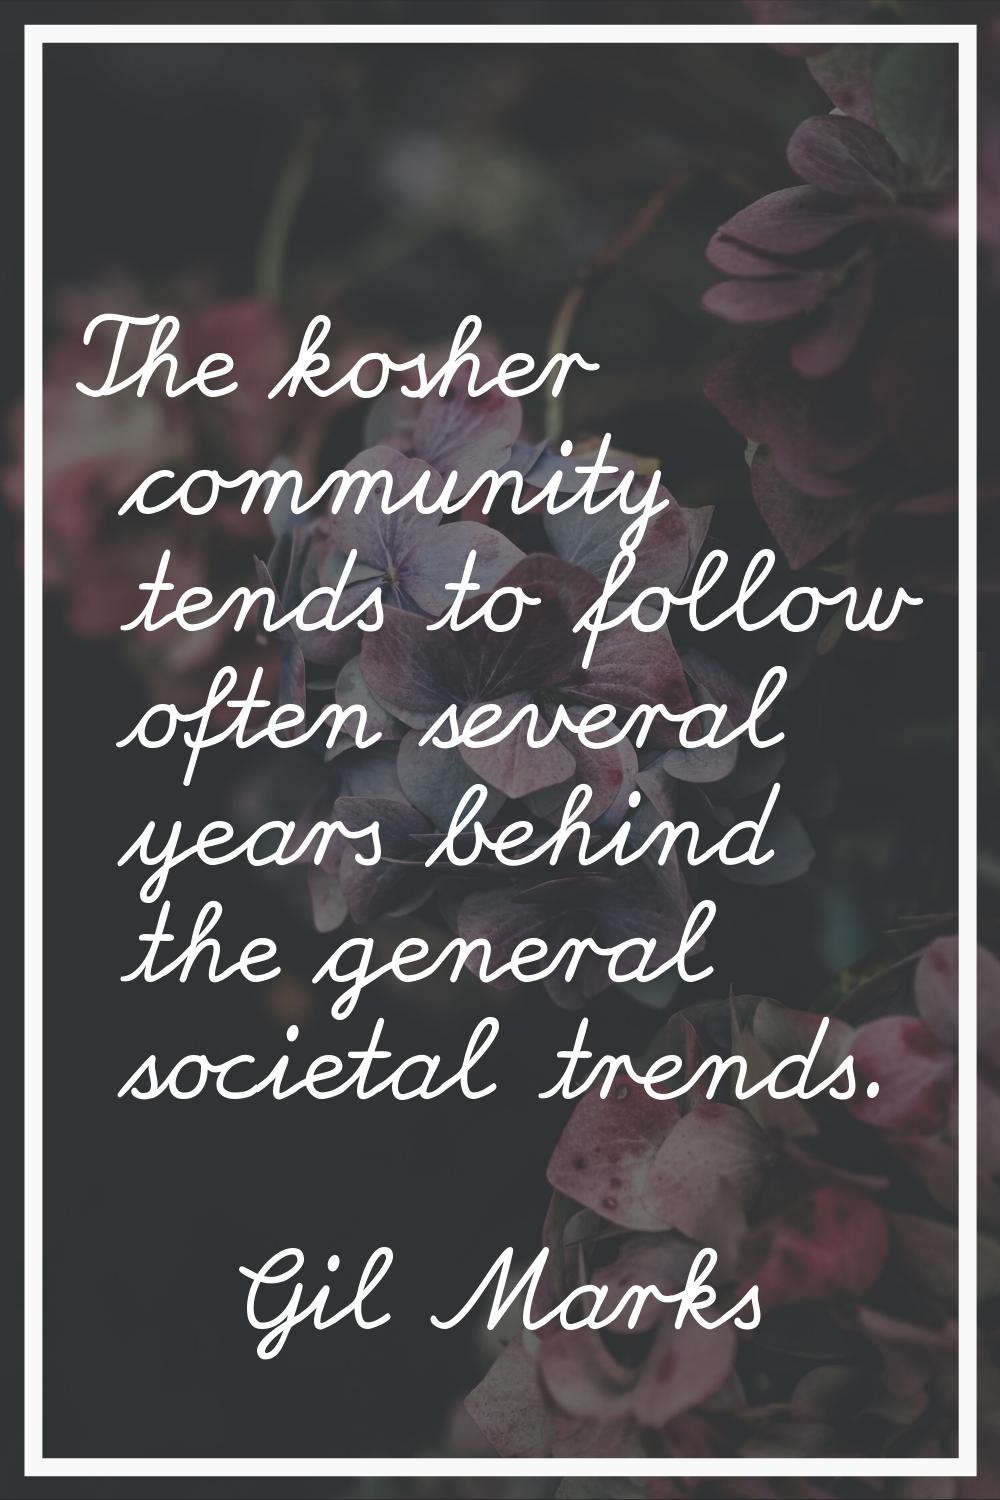 The kosher community tends to follow often several years behind the general societal trends.